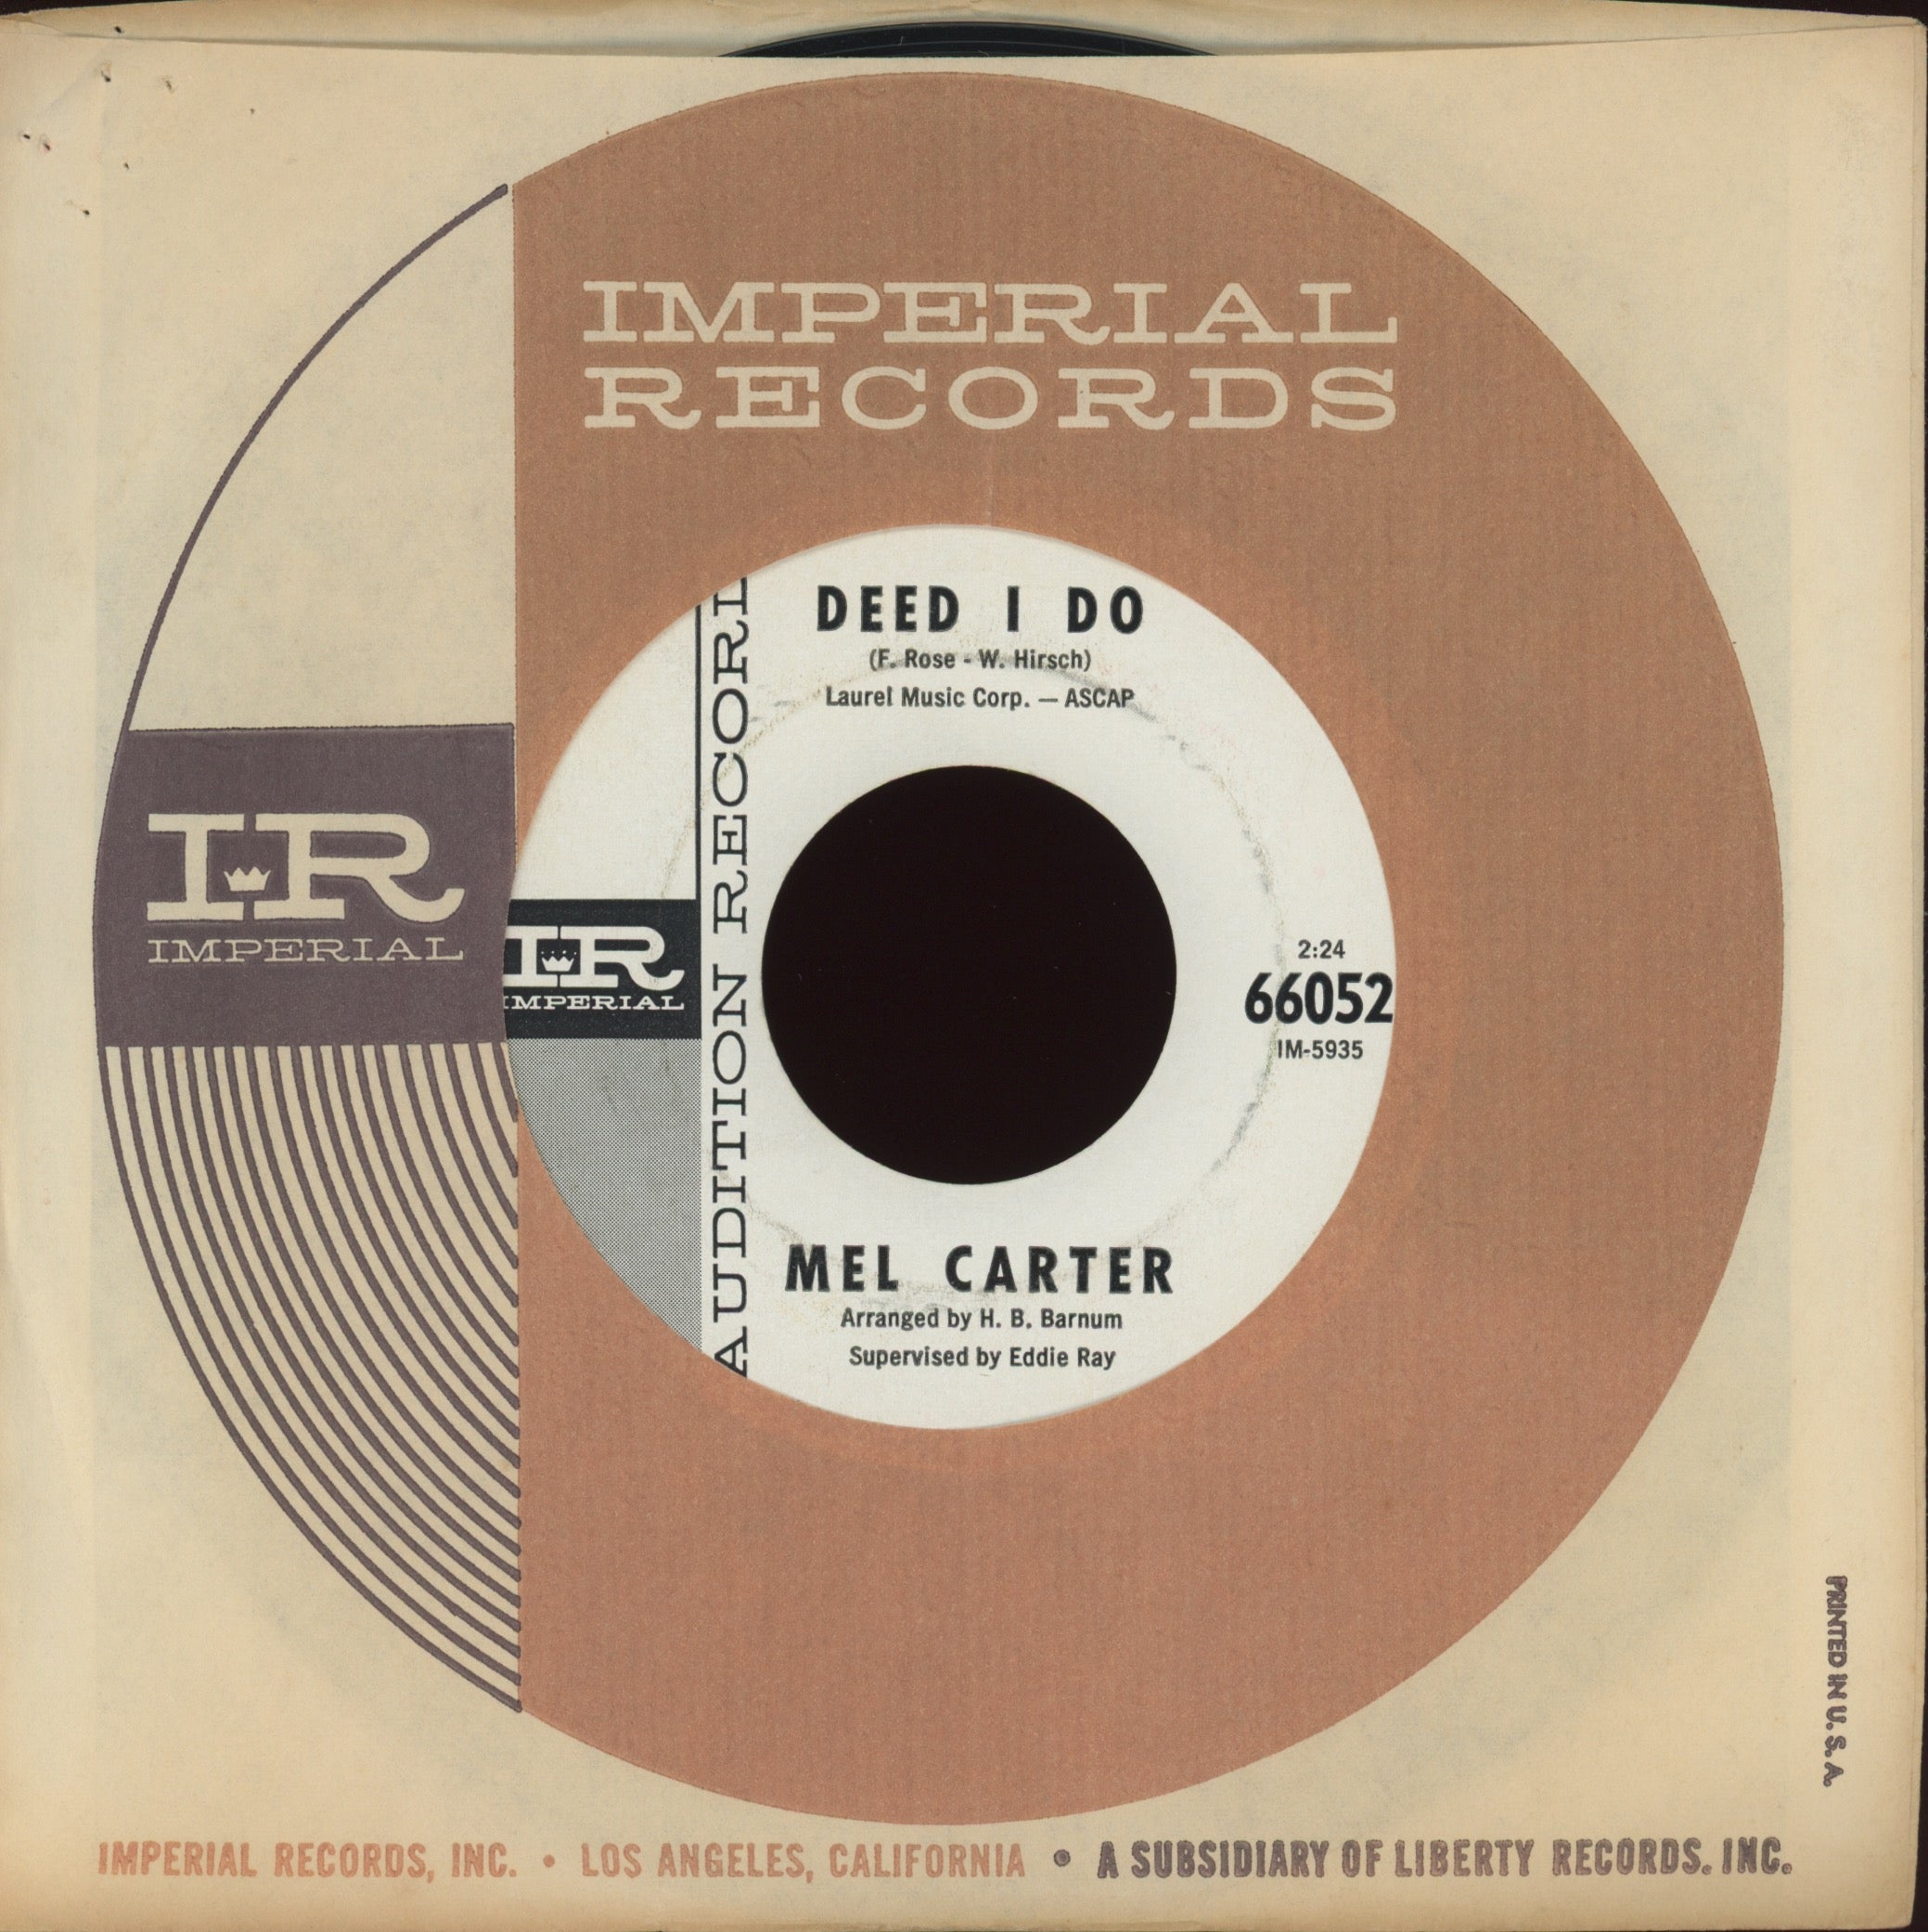 Mel Carter - Deed I Do on Imperial Promo Northern Soul 45